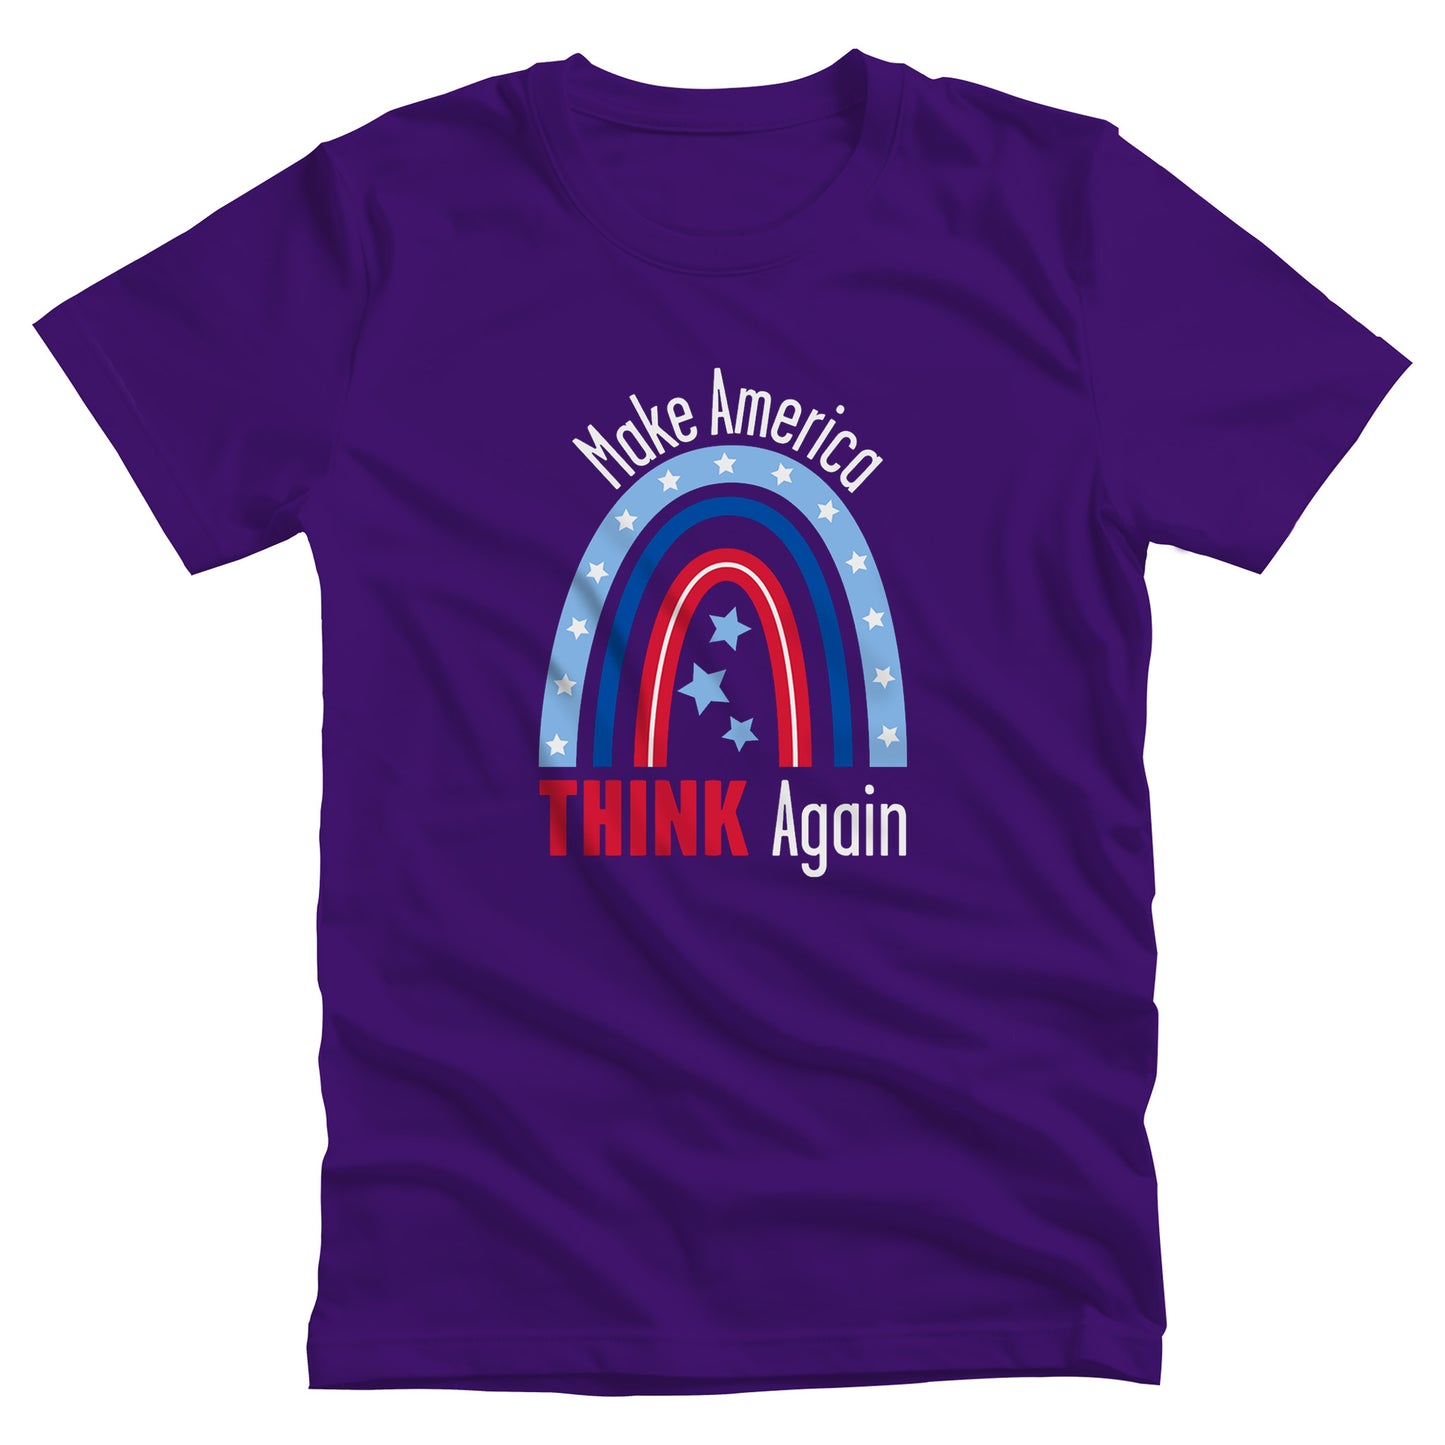 Team Purple color unisex t-shirt that says, “Make America THINK Again” with a graphic of a blue and red rainbow. “Make America” is red and arched over the rainbow. “THINK Again” is beneath the rainbow with “THINK” being blue and “Again” being red.